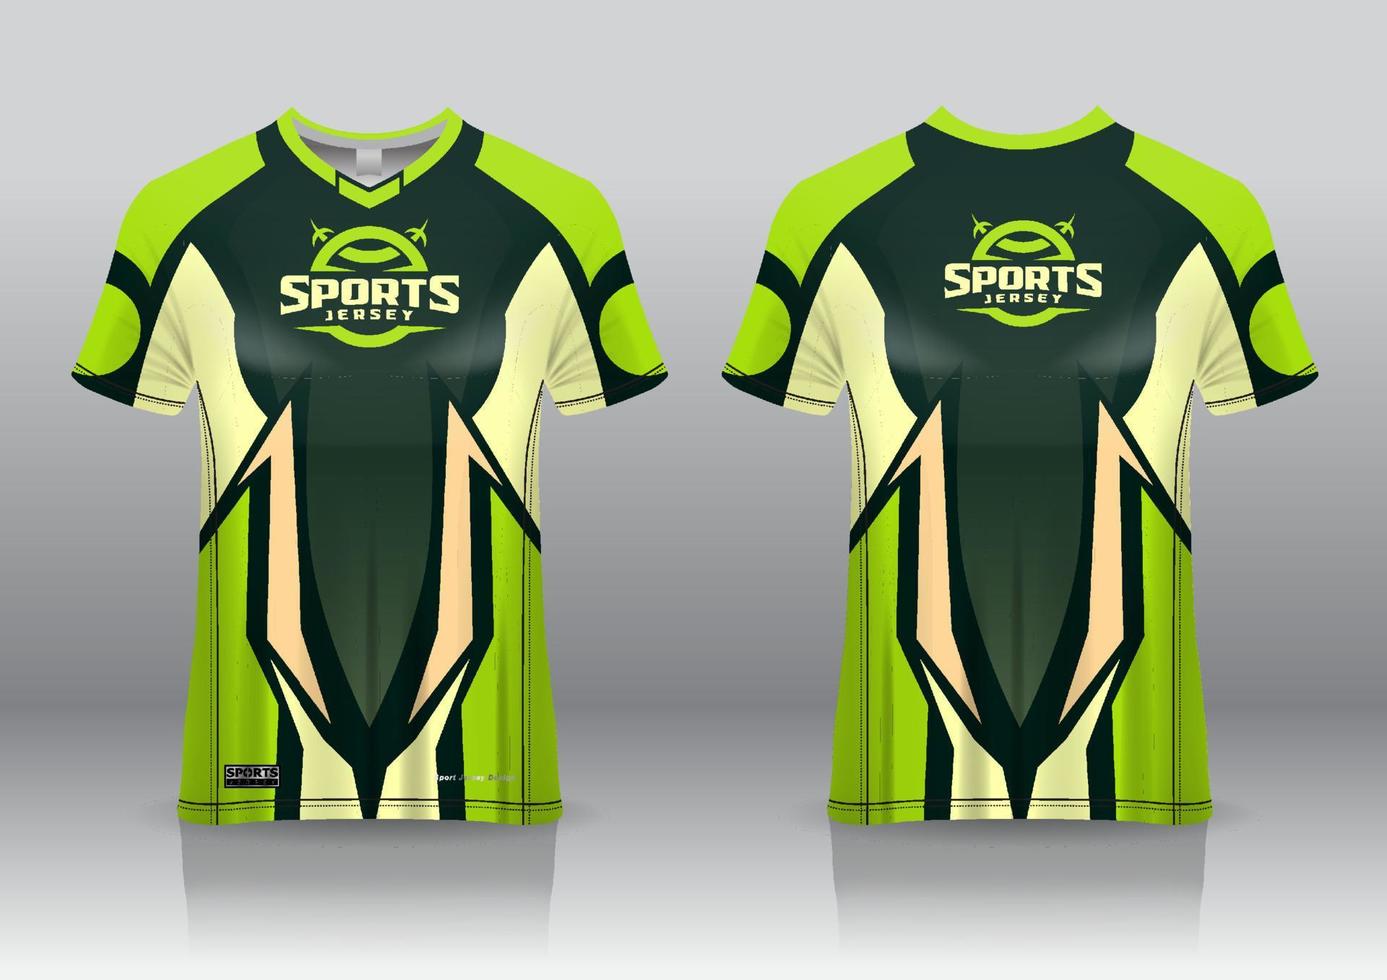 esport jersey gaming design front and back view vector